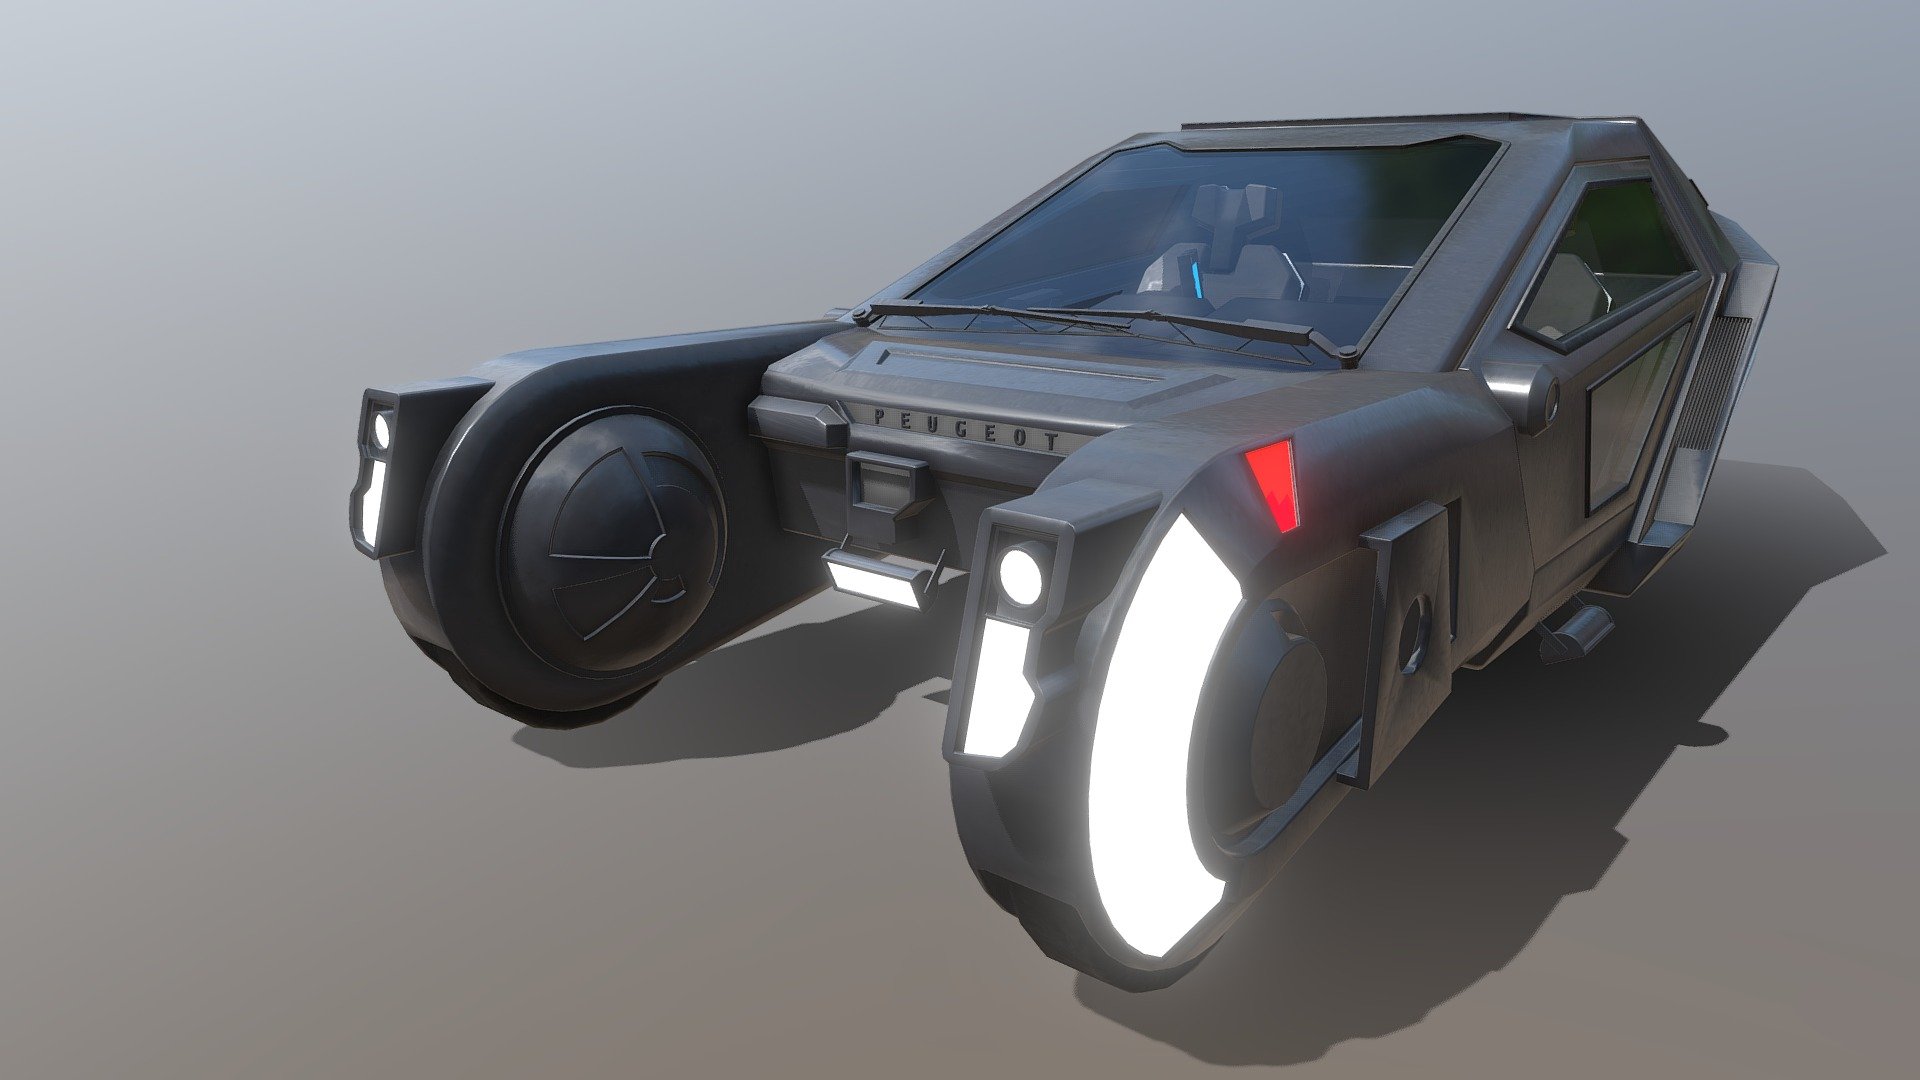 Week 7 of the on going project modelling K's Spinner from Blade Runner 2049. Was unfortunately unable to put final version onto Sketchfab due to changing and optimising textures in Unreal, but this was used as the final model/wireframe 3d model